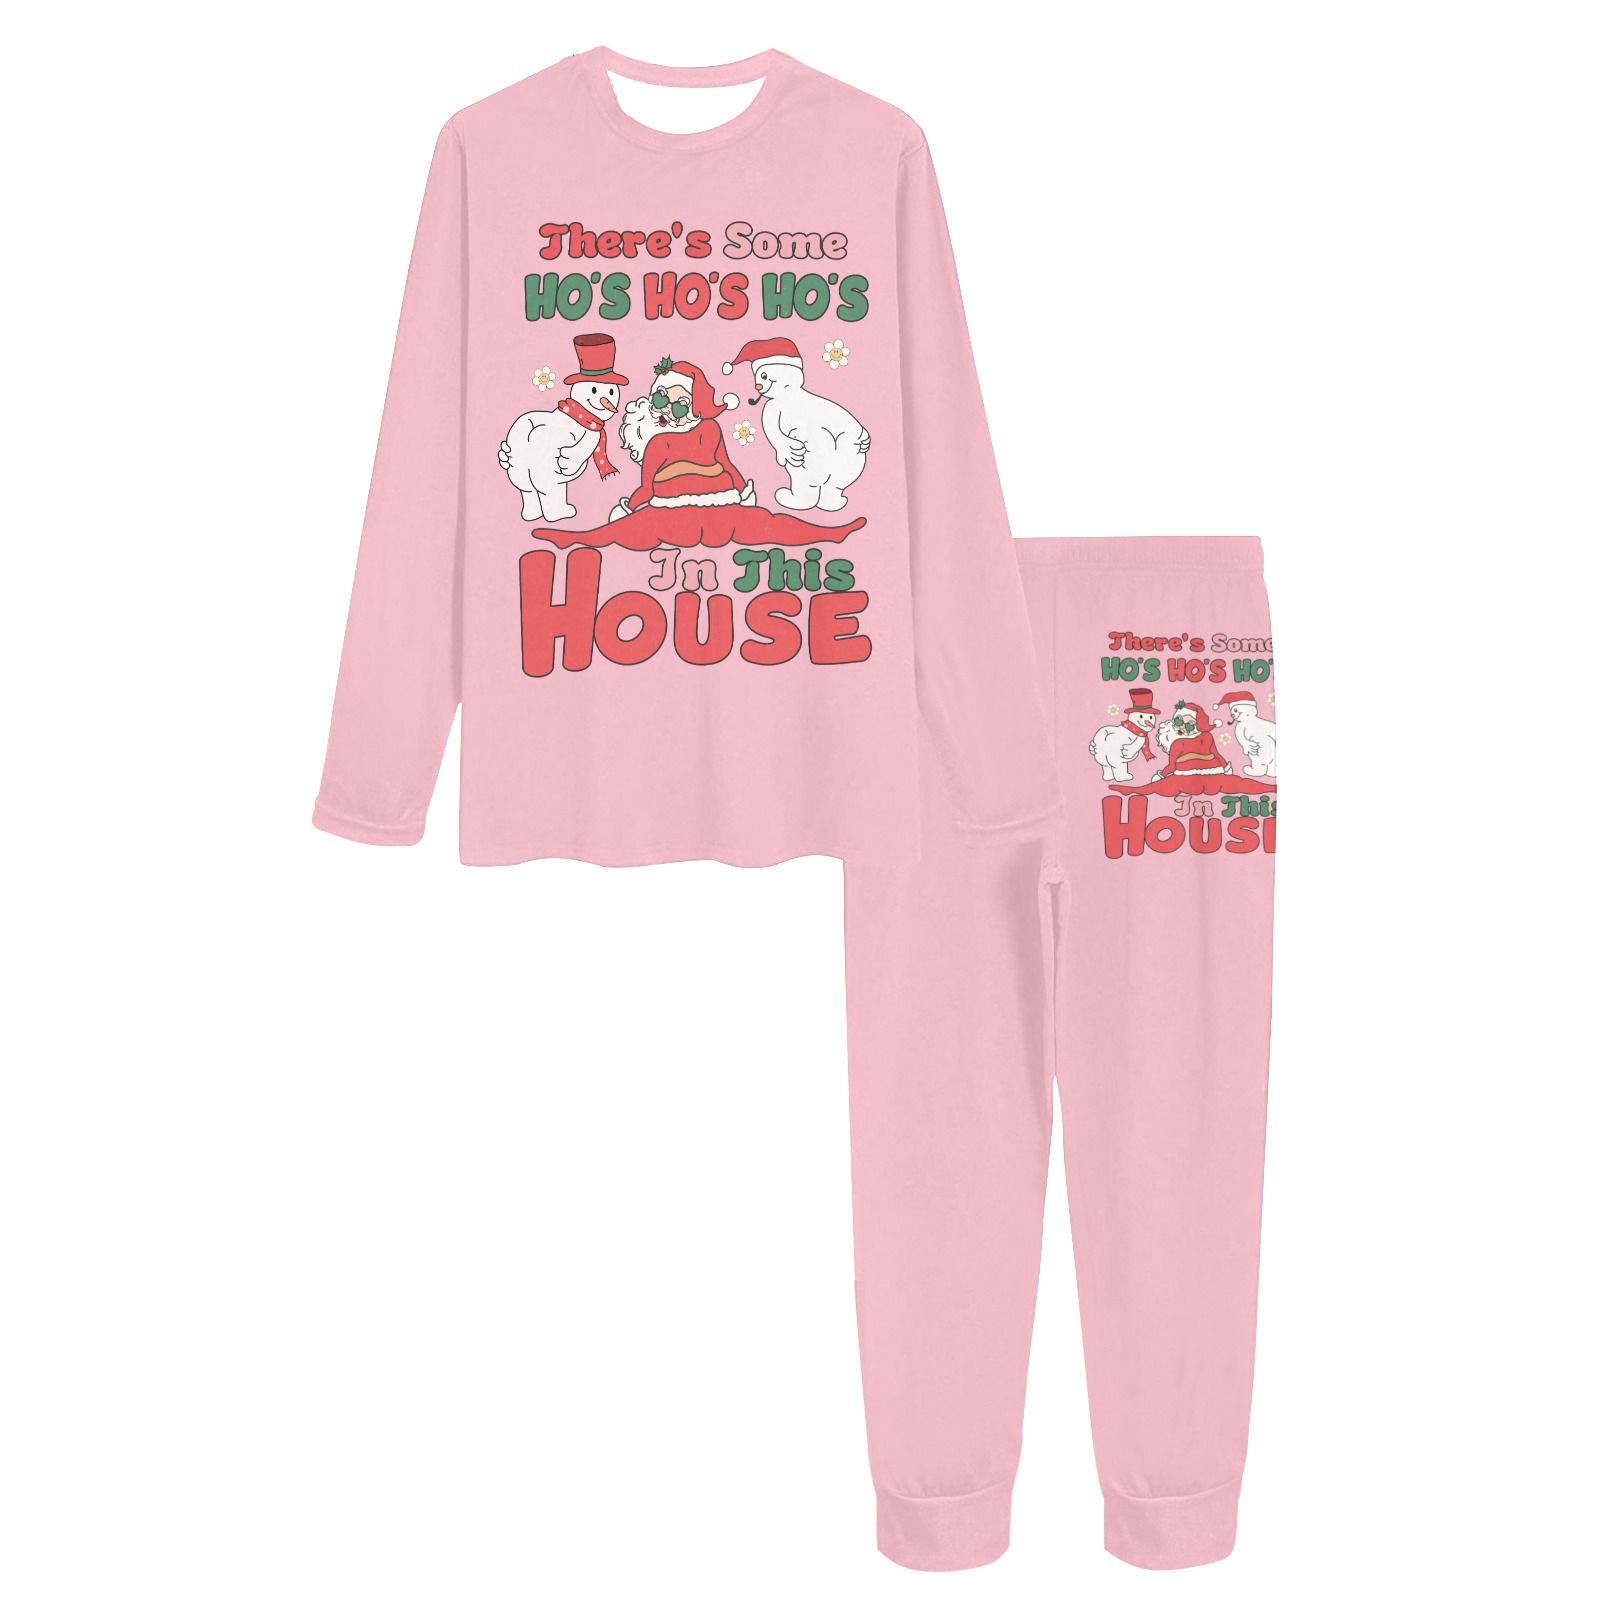 There's Some Ho's In This House (P) Women's All Over Print Pajama Set